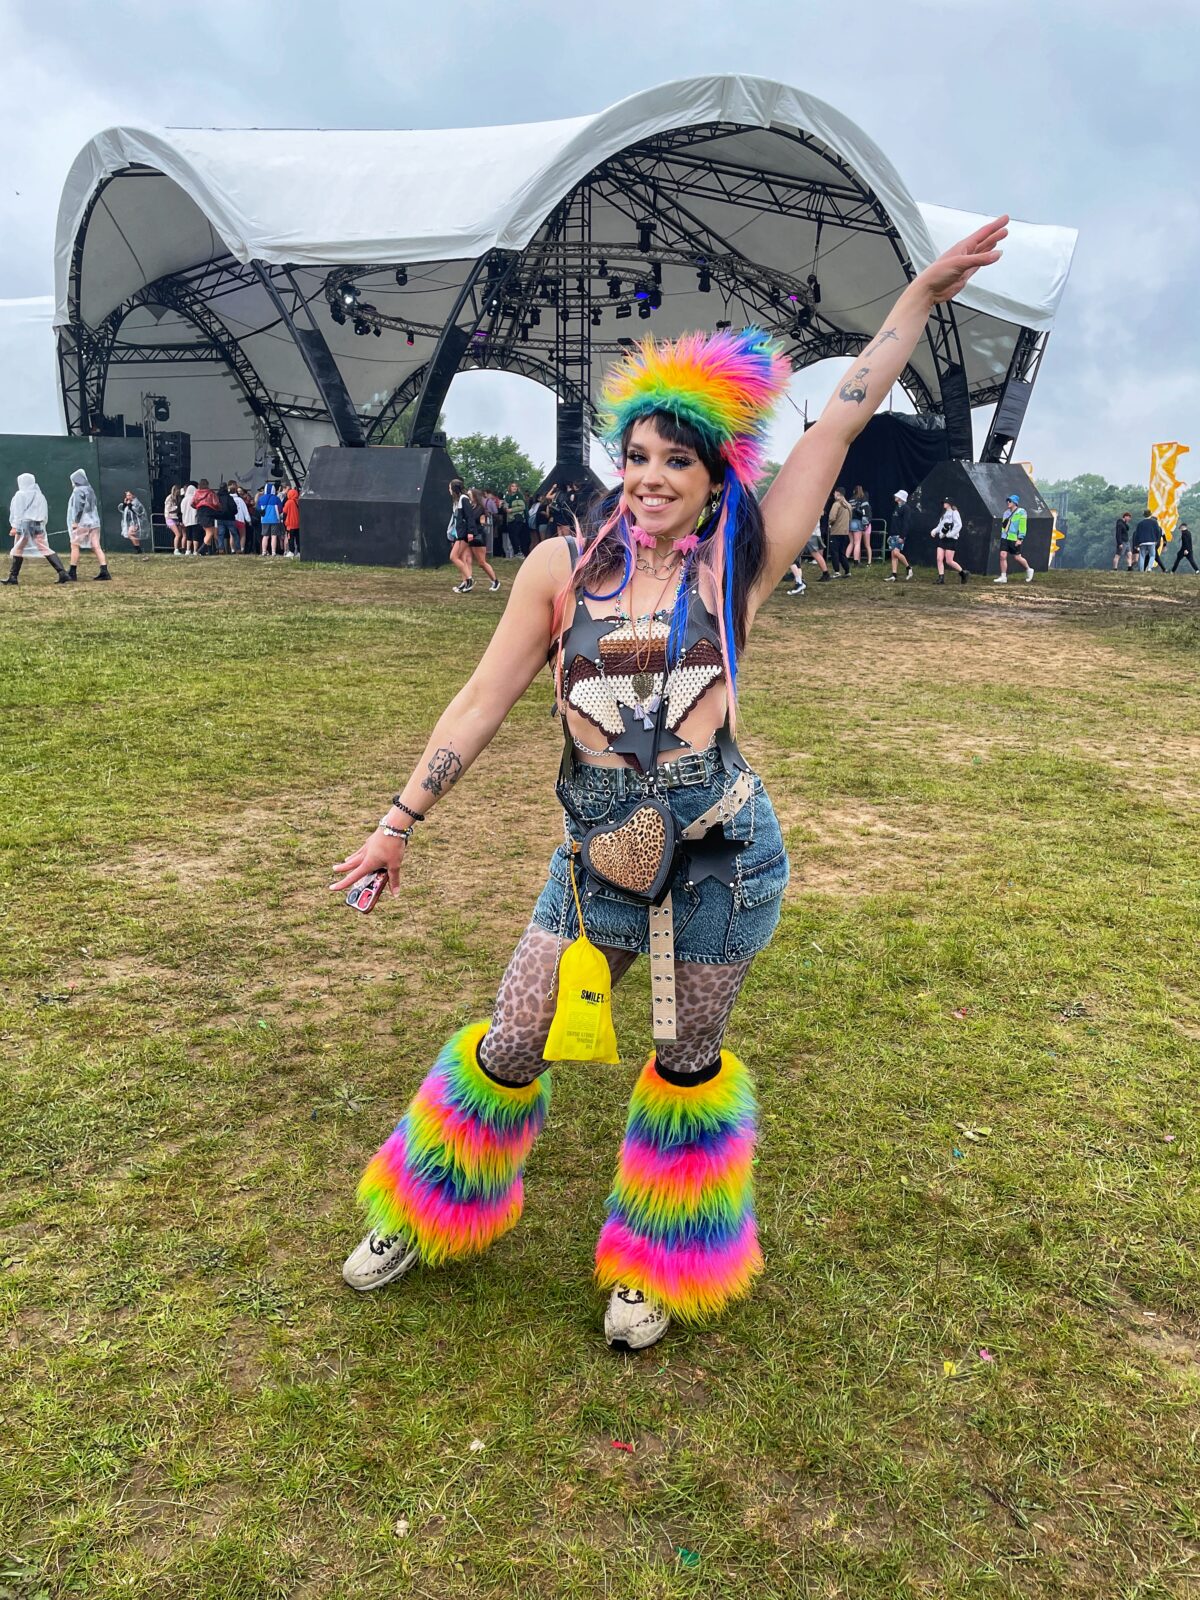 Now THIS is how you do uninhibited festival fashion